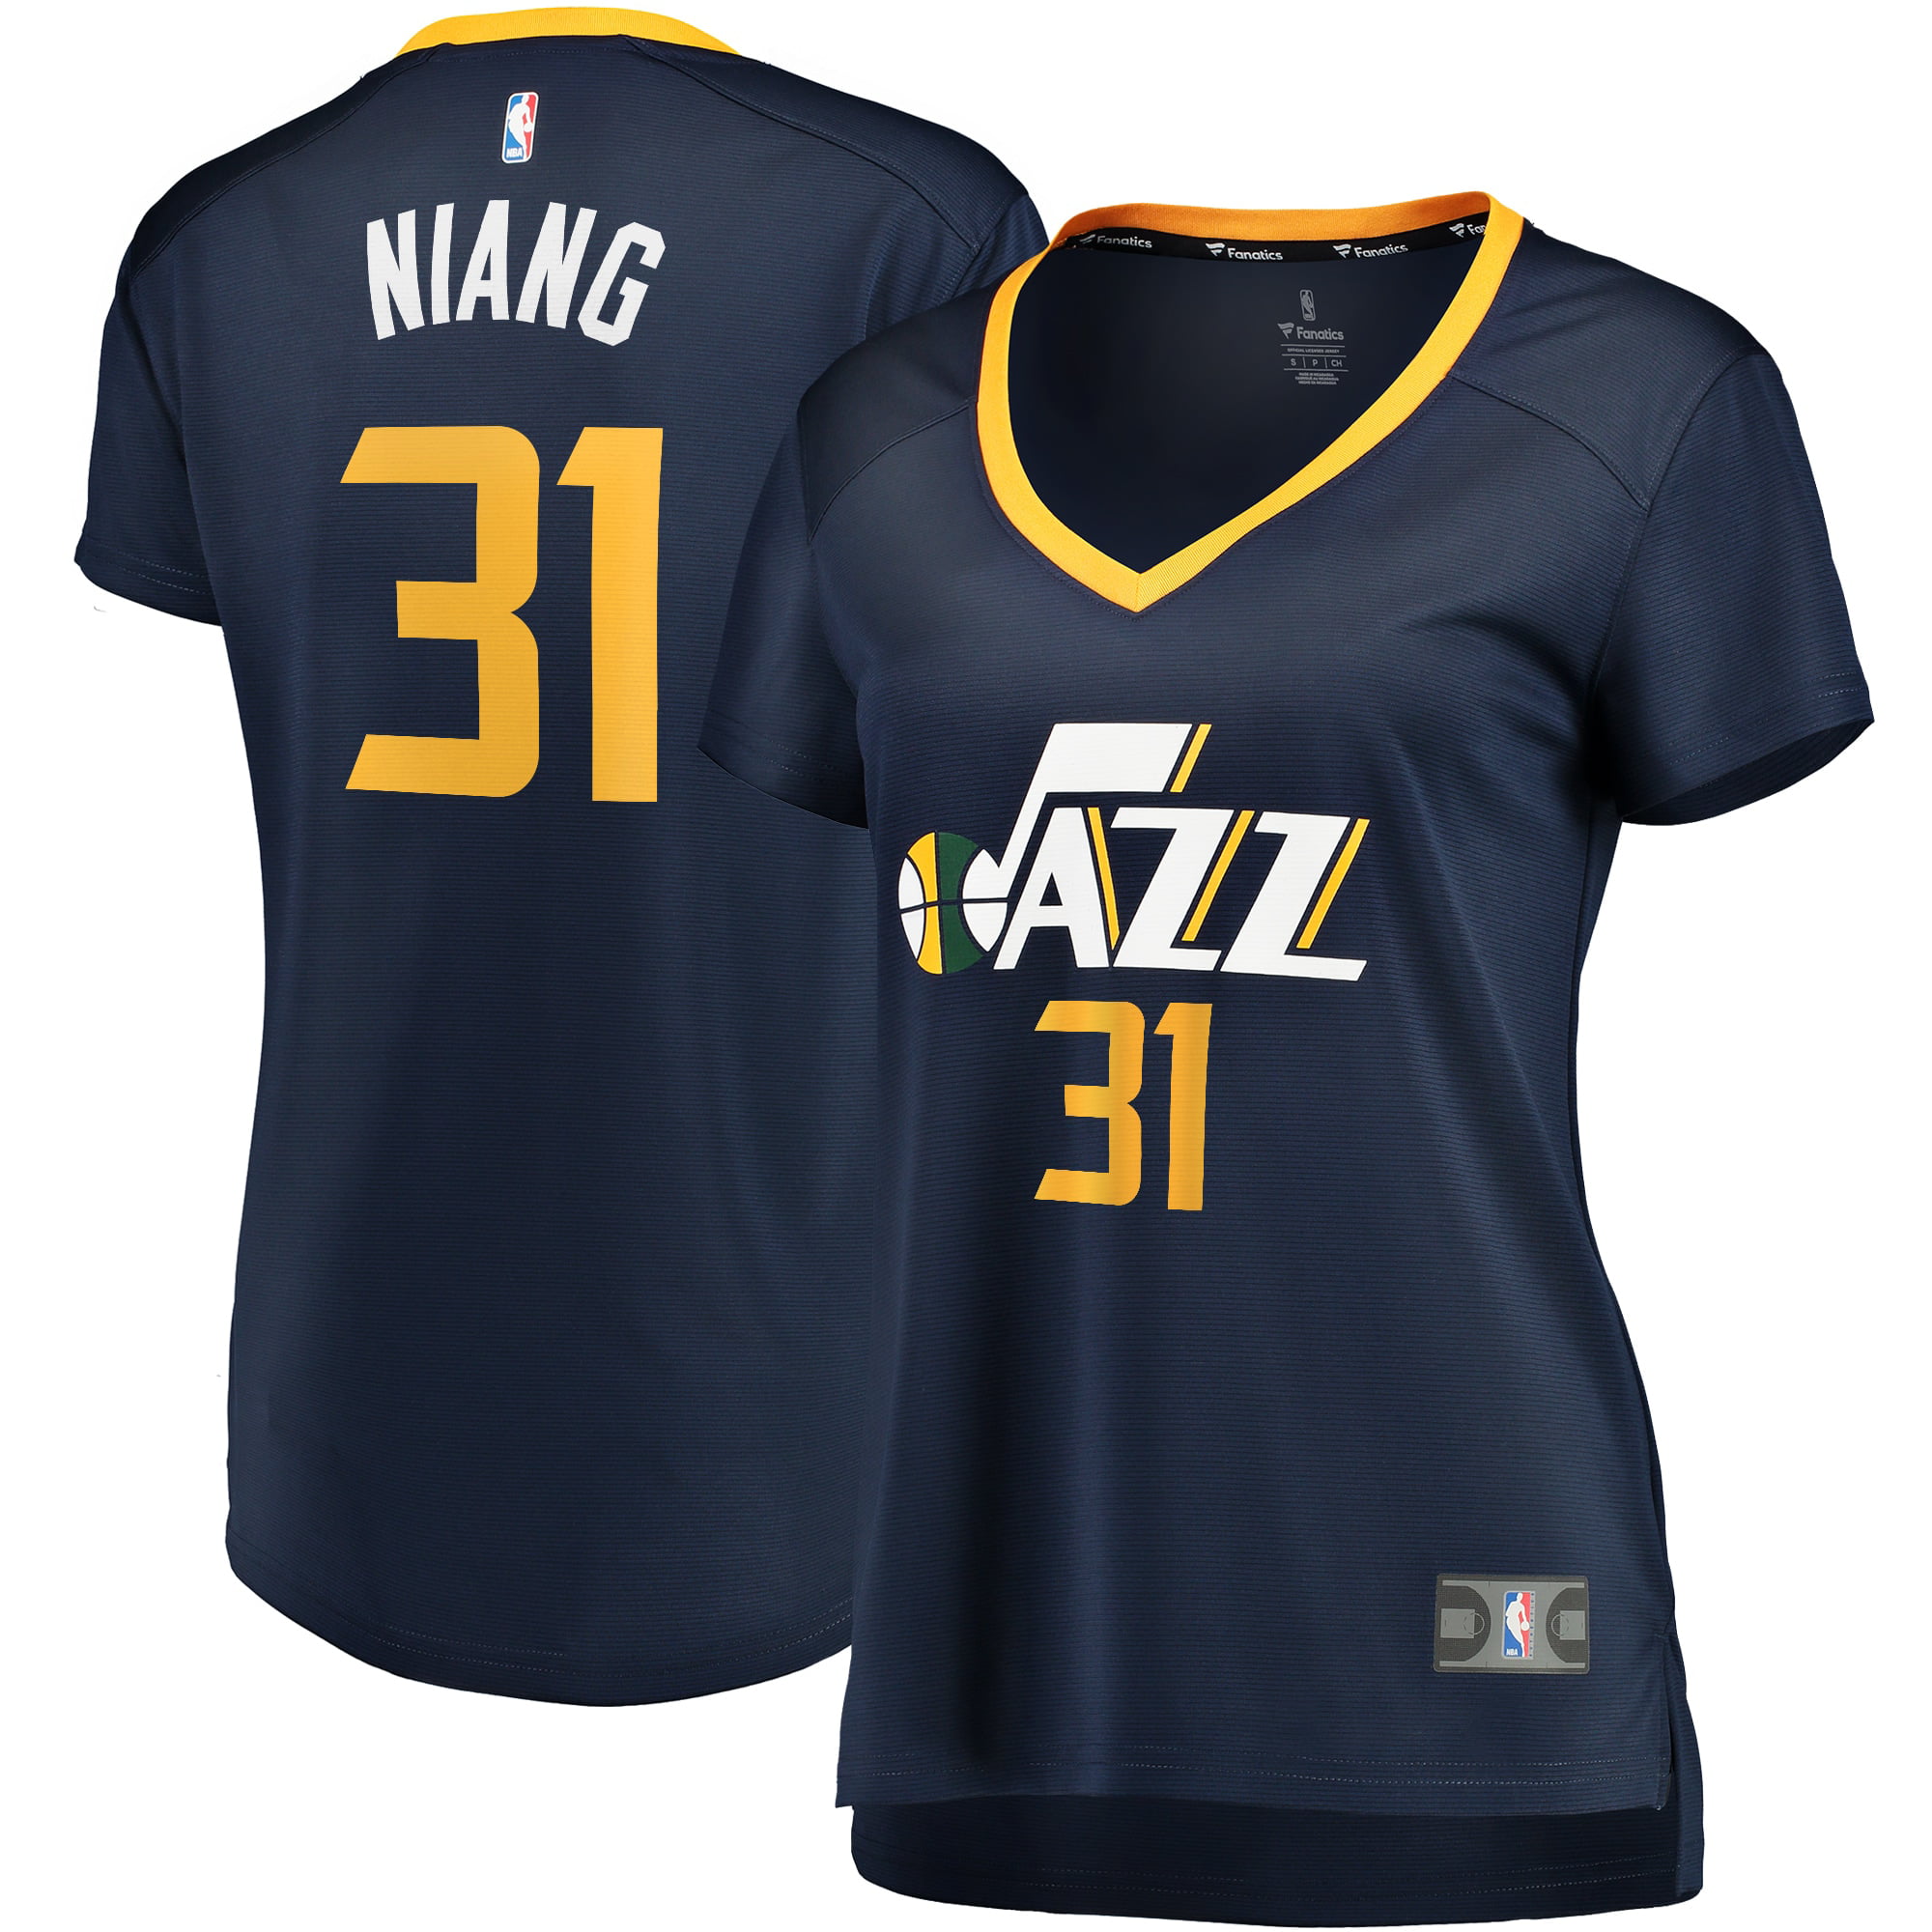 georges niang jersey